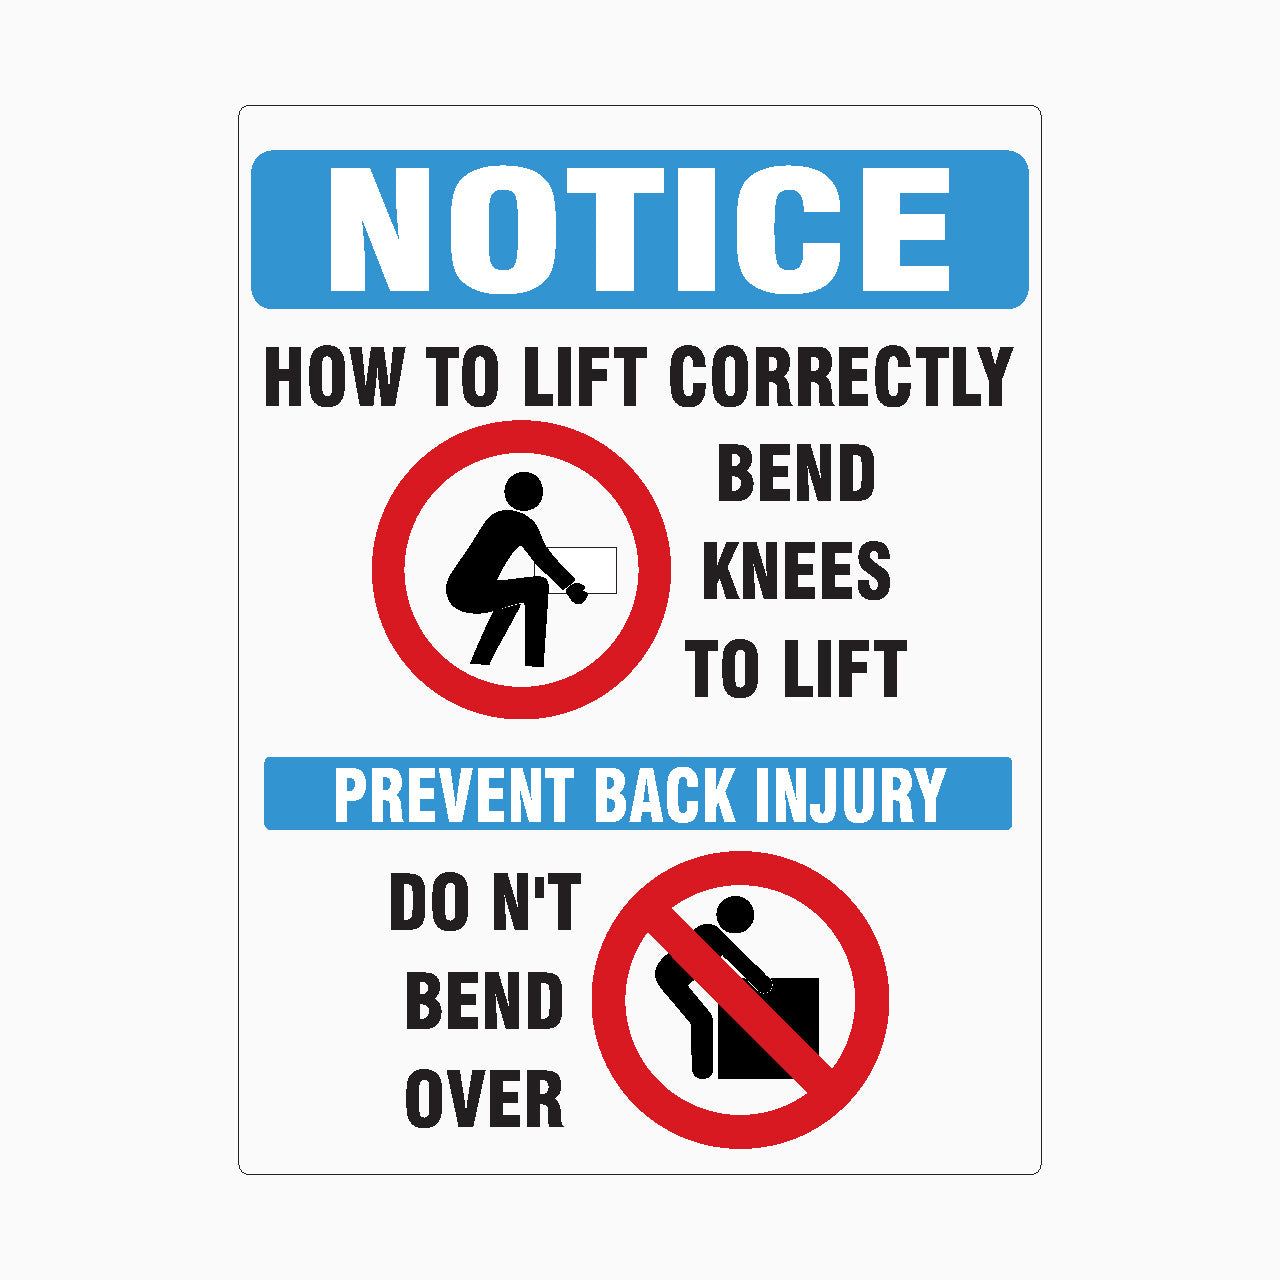 HOW TO LIFT CORRECTLY SIGN - NOTICE SIGN - BEND KNEES TO LIFT SIGN - DO NOT BEND OVER SIGN